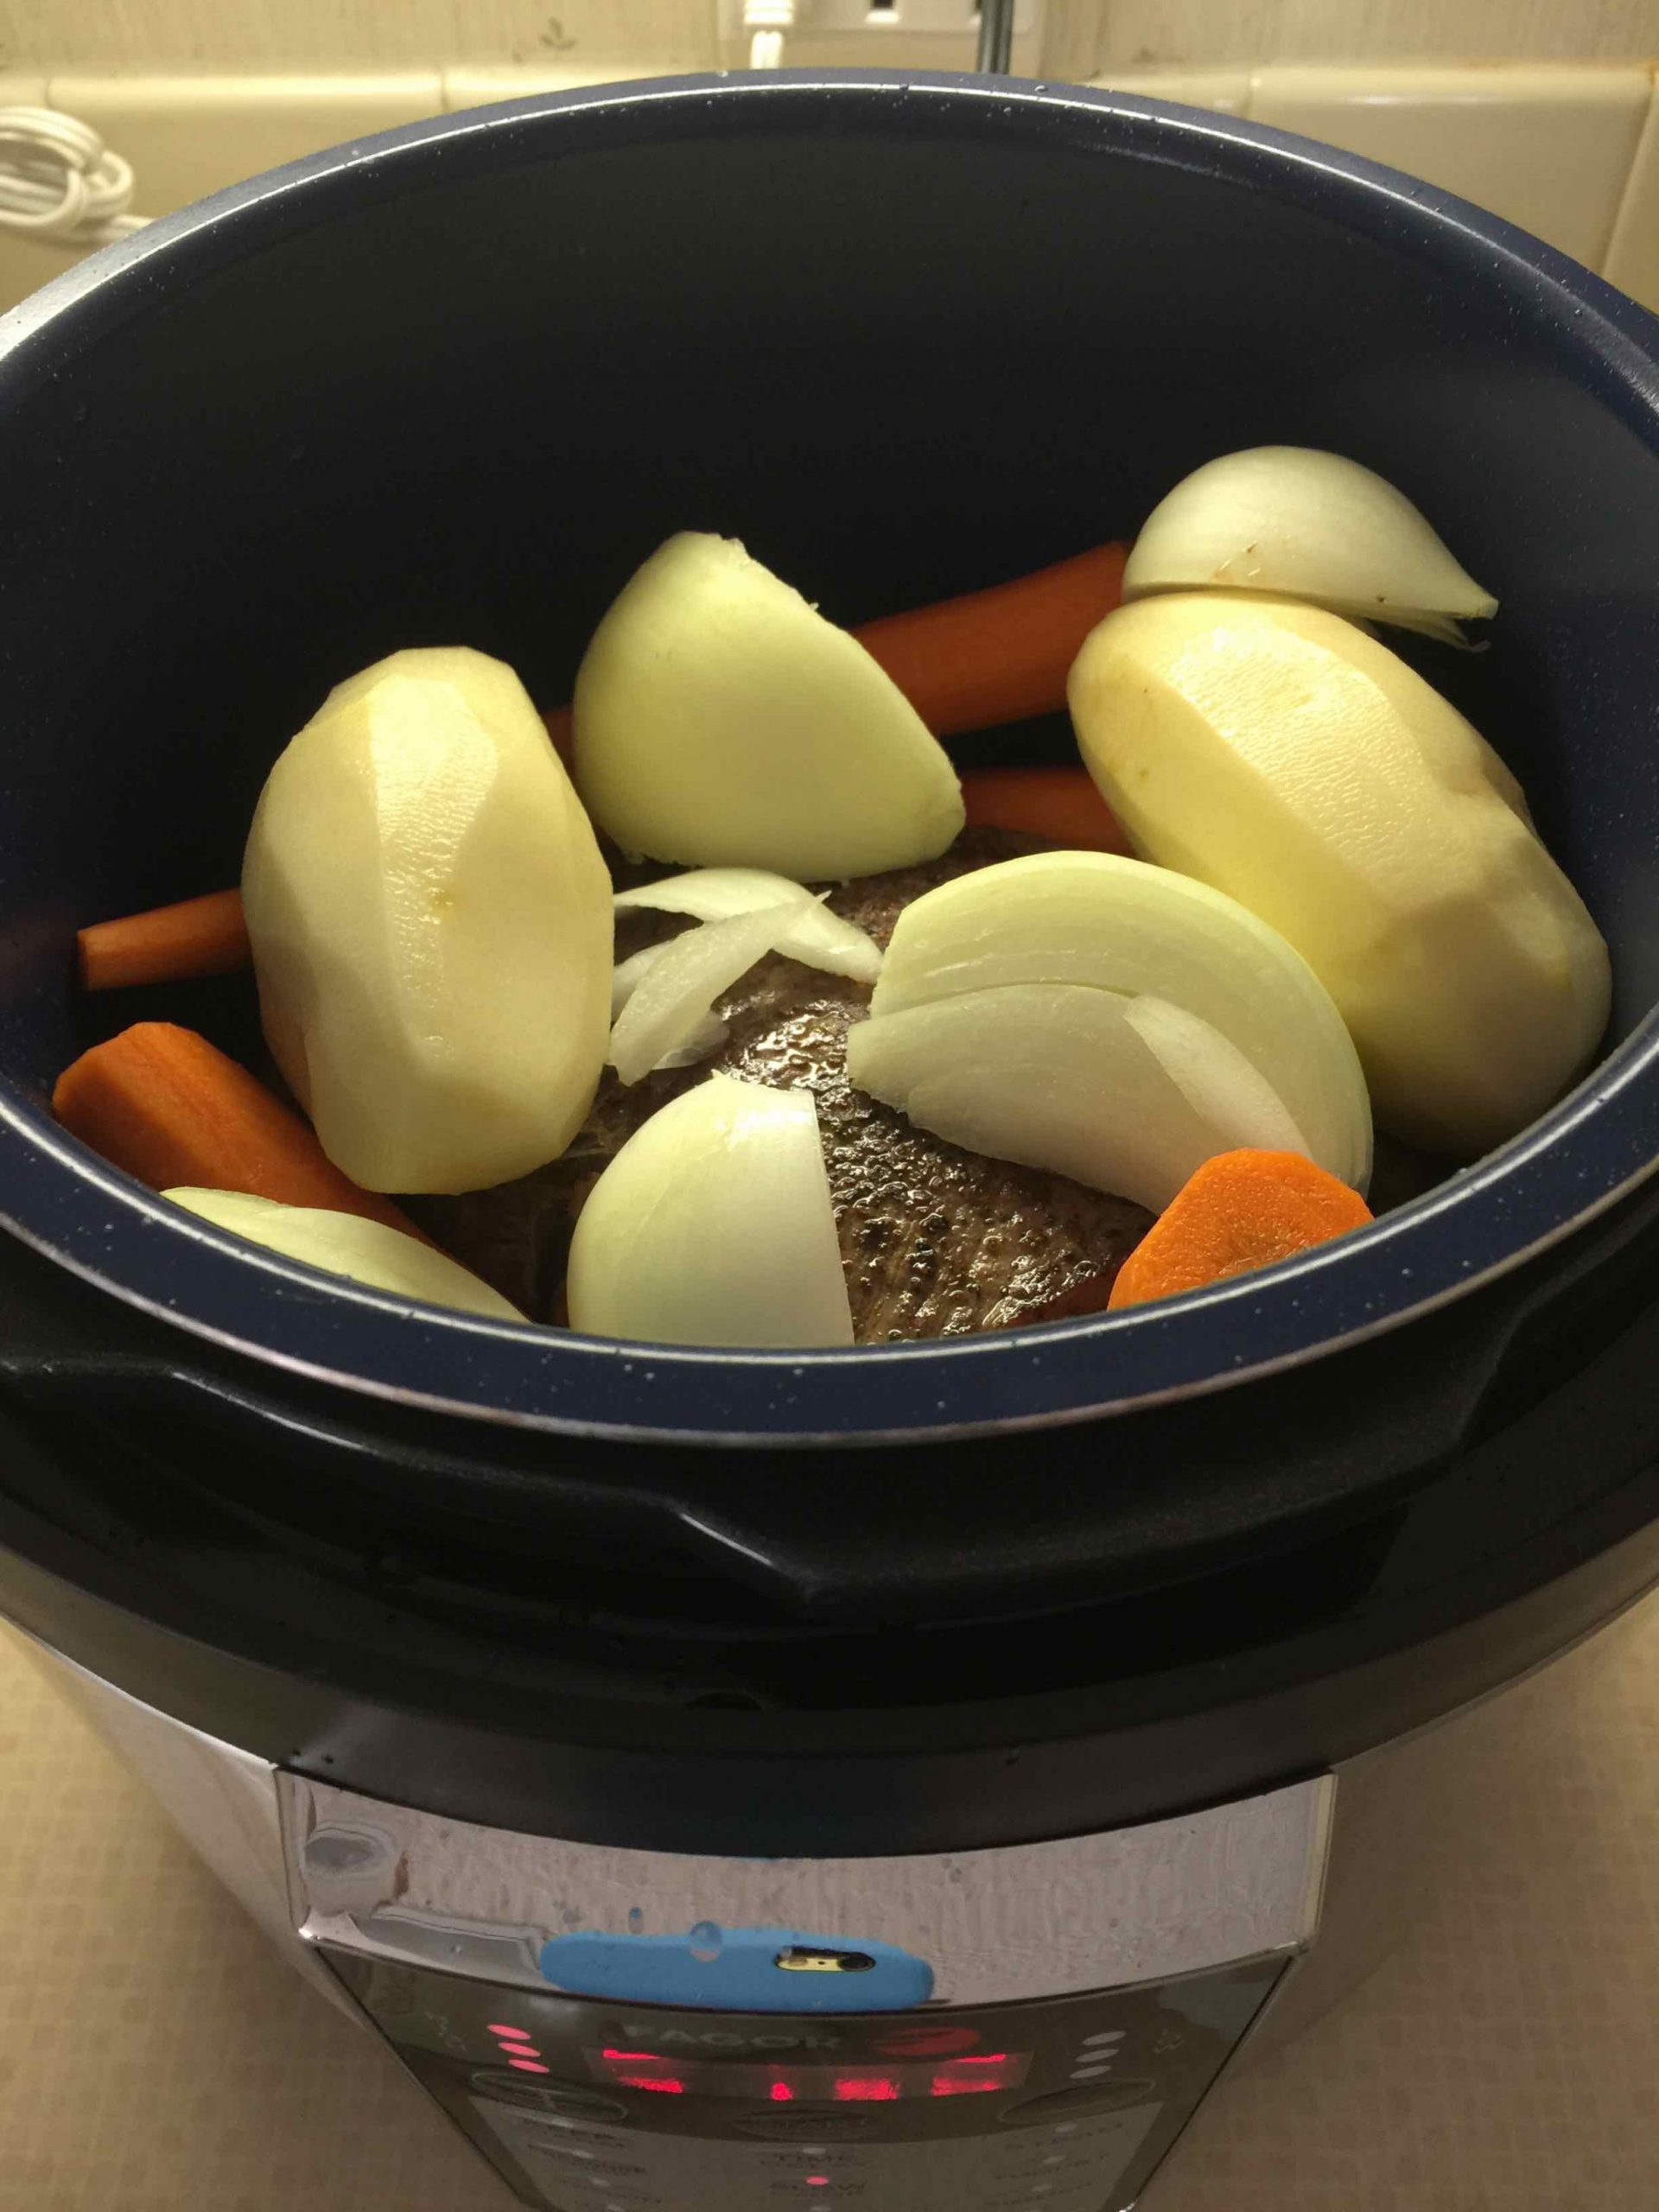 Onions, potatoes and carrots cooking in pressure cooker